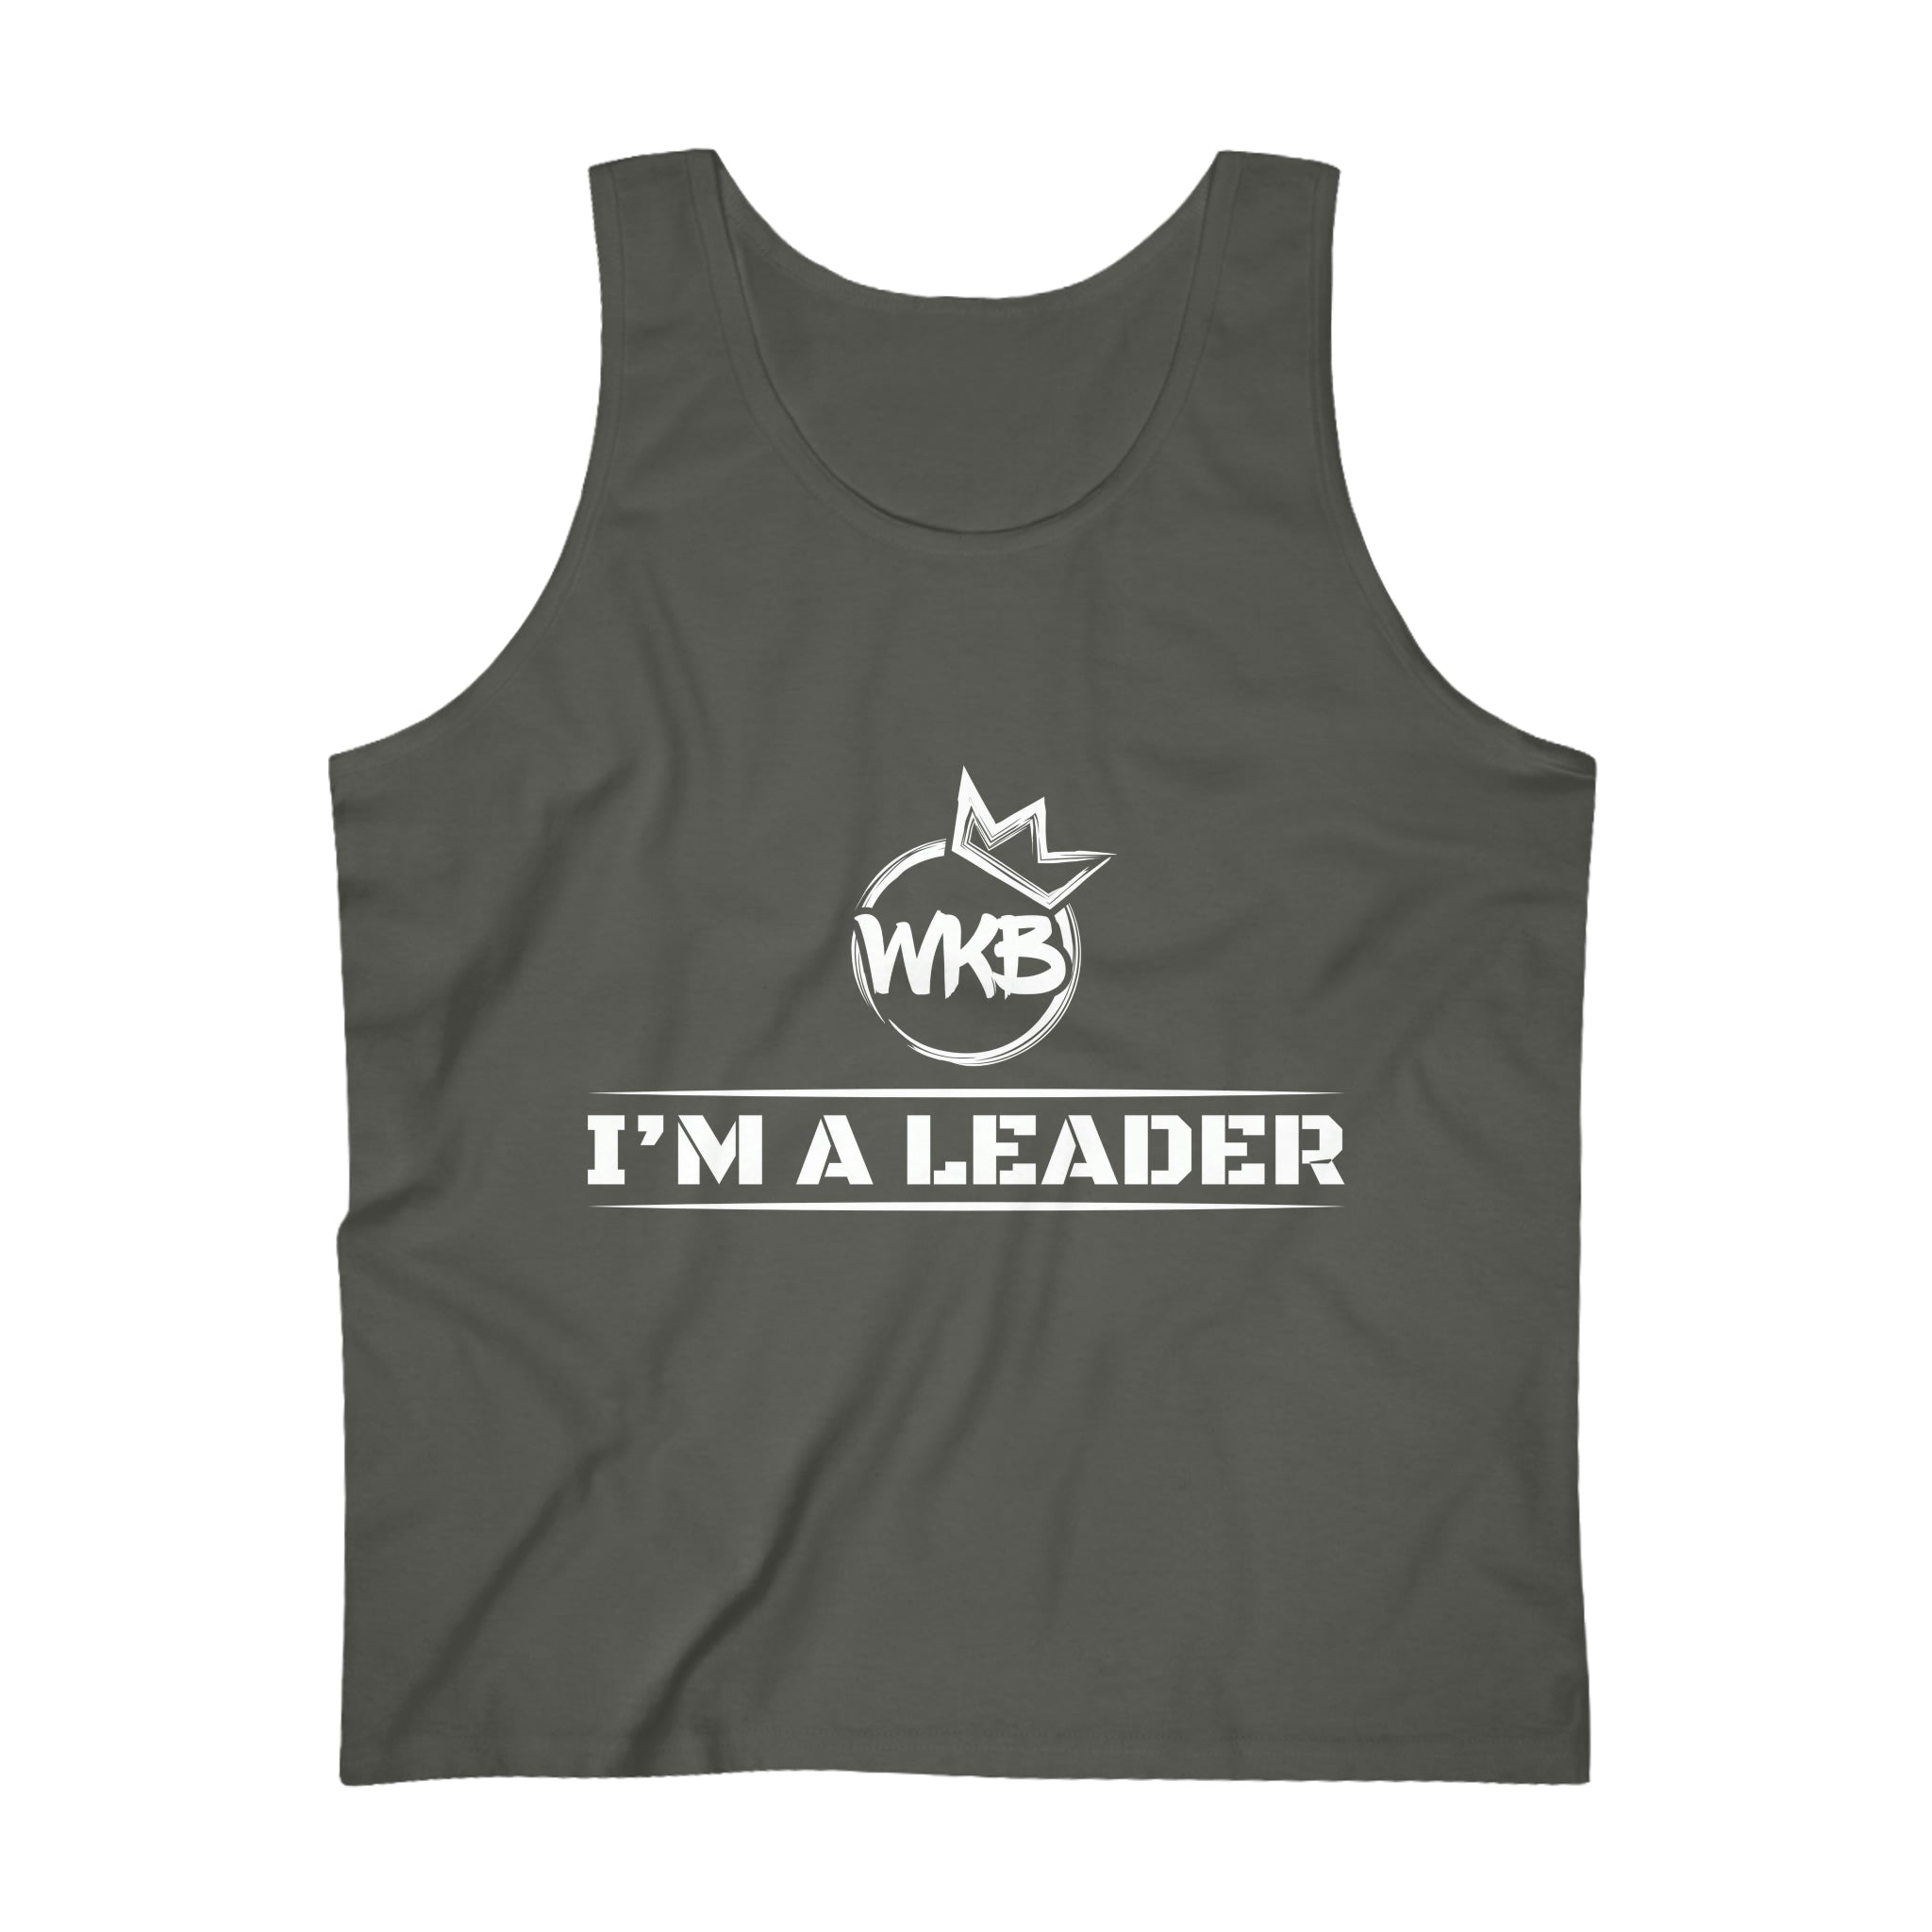 Leader's Ultra Cotton Tank Top